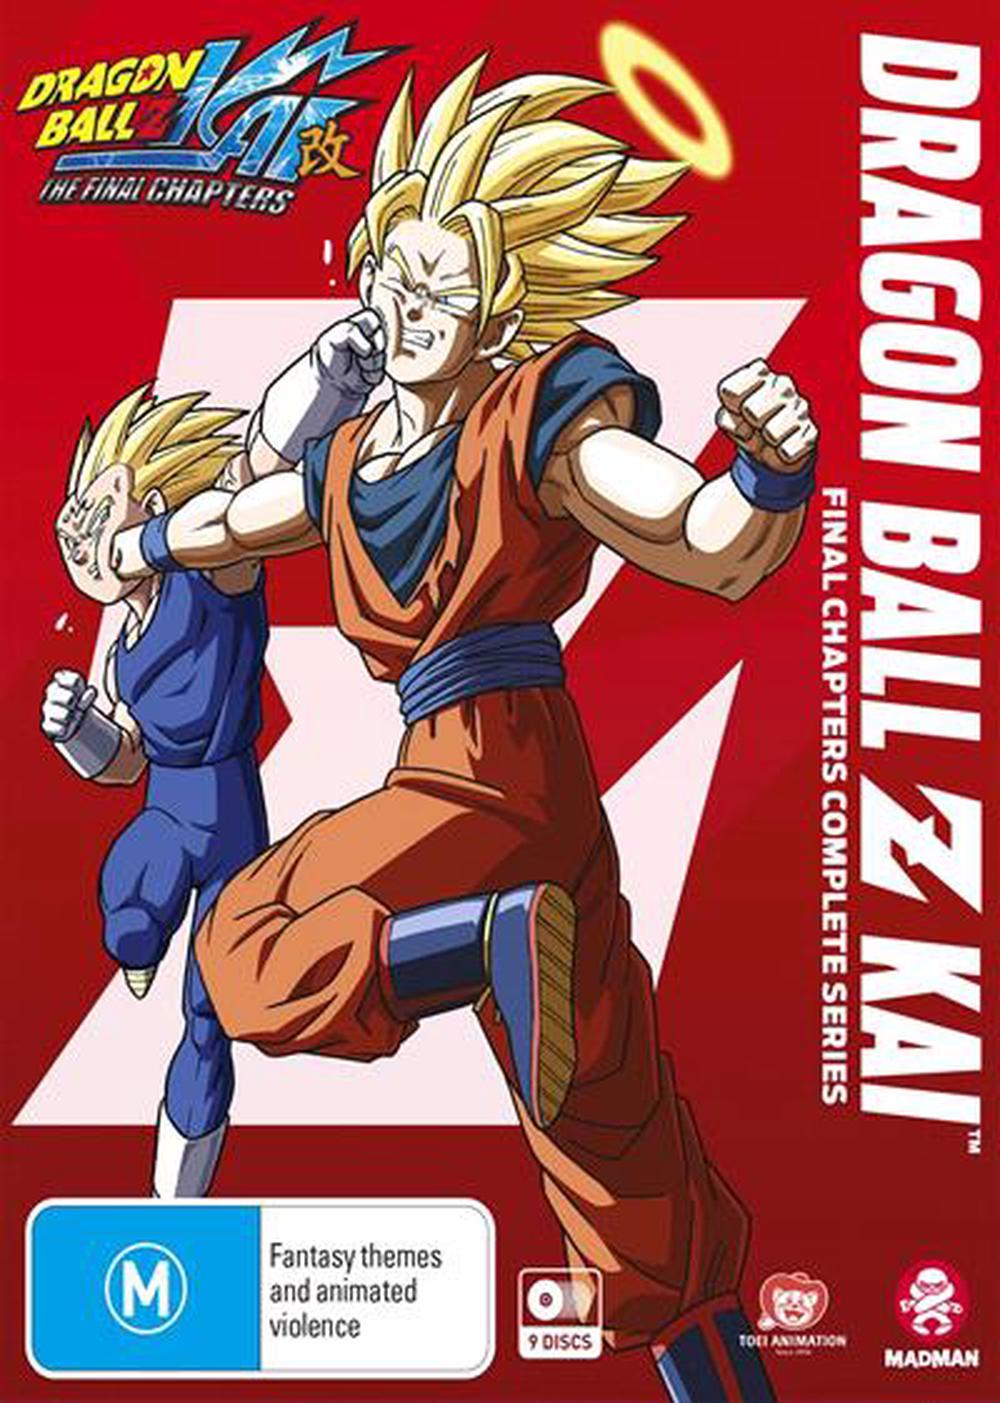 Dragon Ball Z Kai Final Chapters The Series Collection